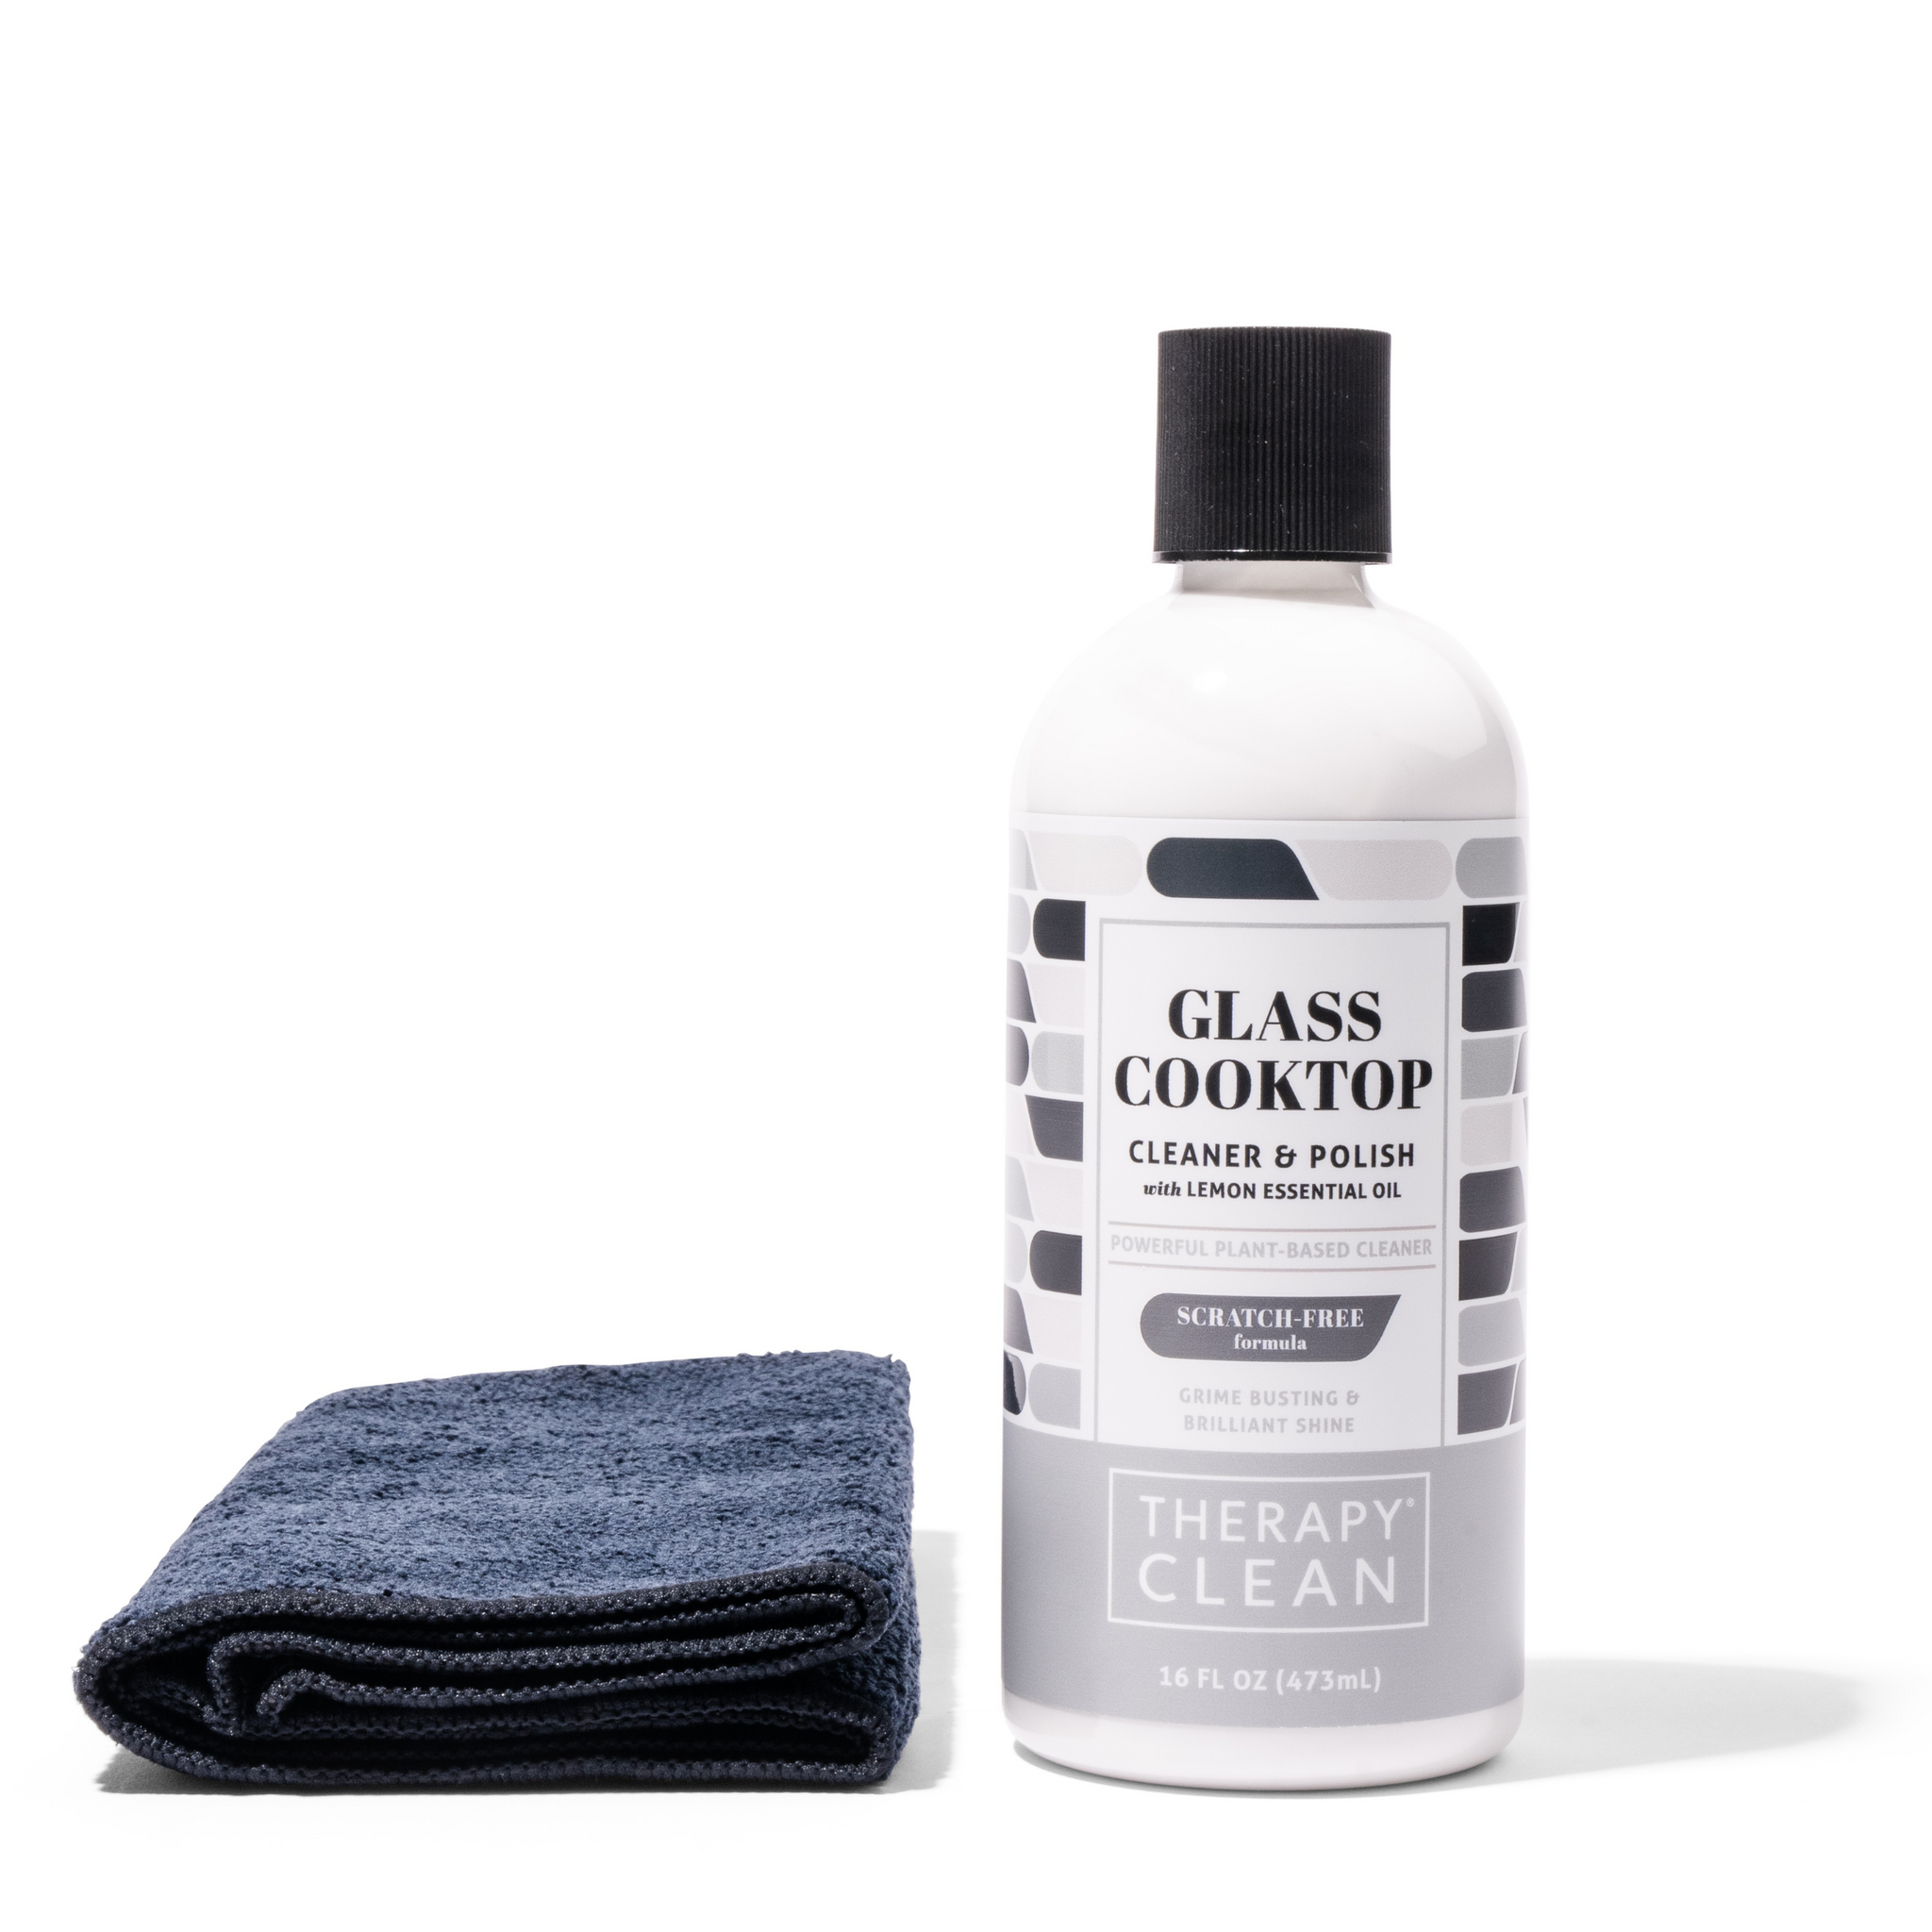 Glass Cooktop Cleaner & Polish Kit